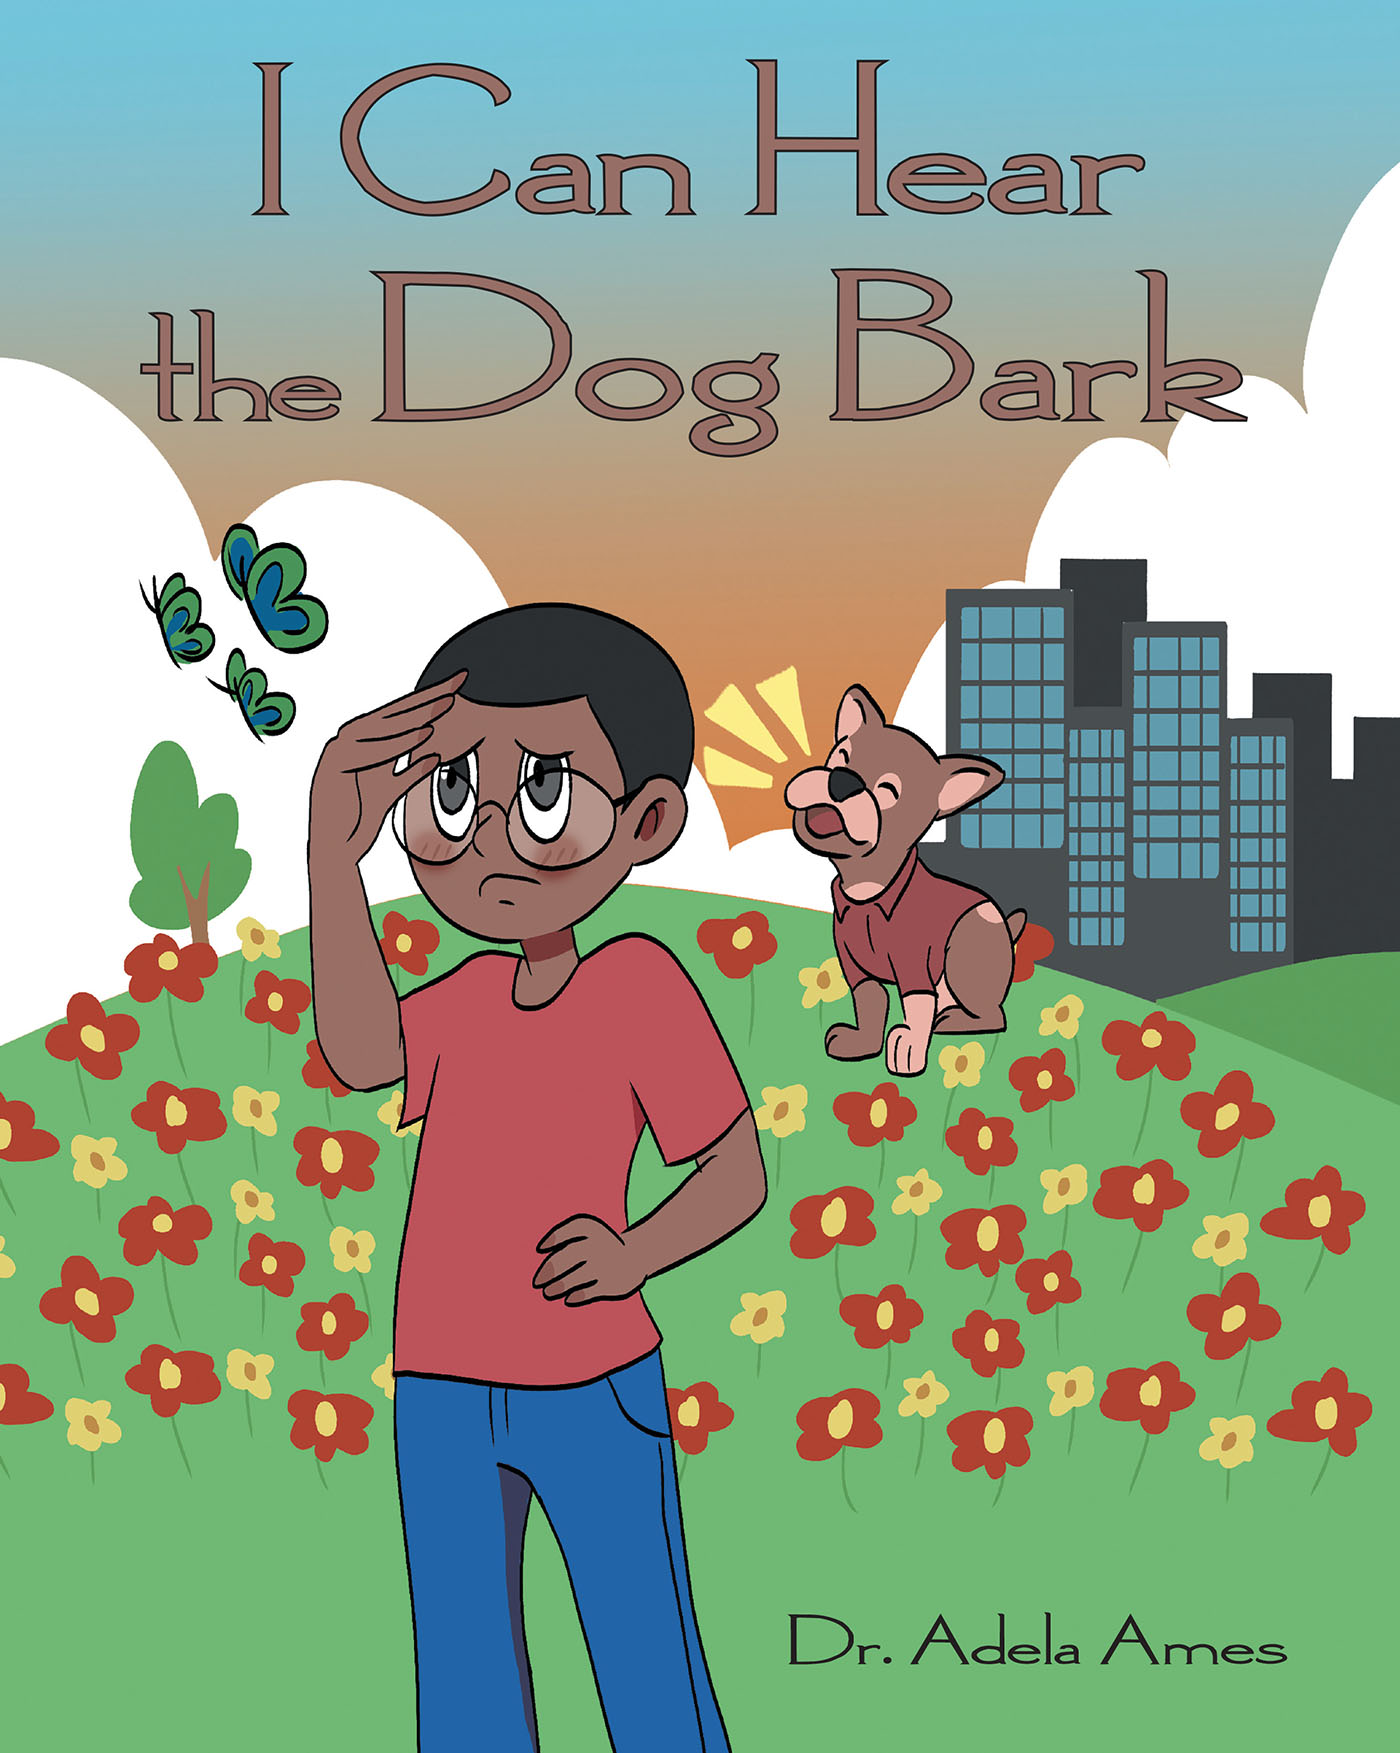 Dr. Adela Ames’s New Book, "I Can Hear the Dog Bark," Follows a Young Boy Who Must Adapt to Living in a Foster Home After Being Taken from His Parents and Dog